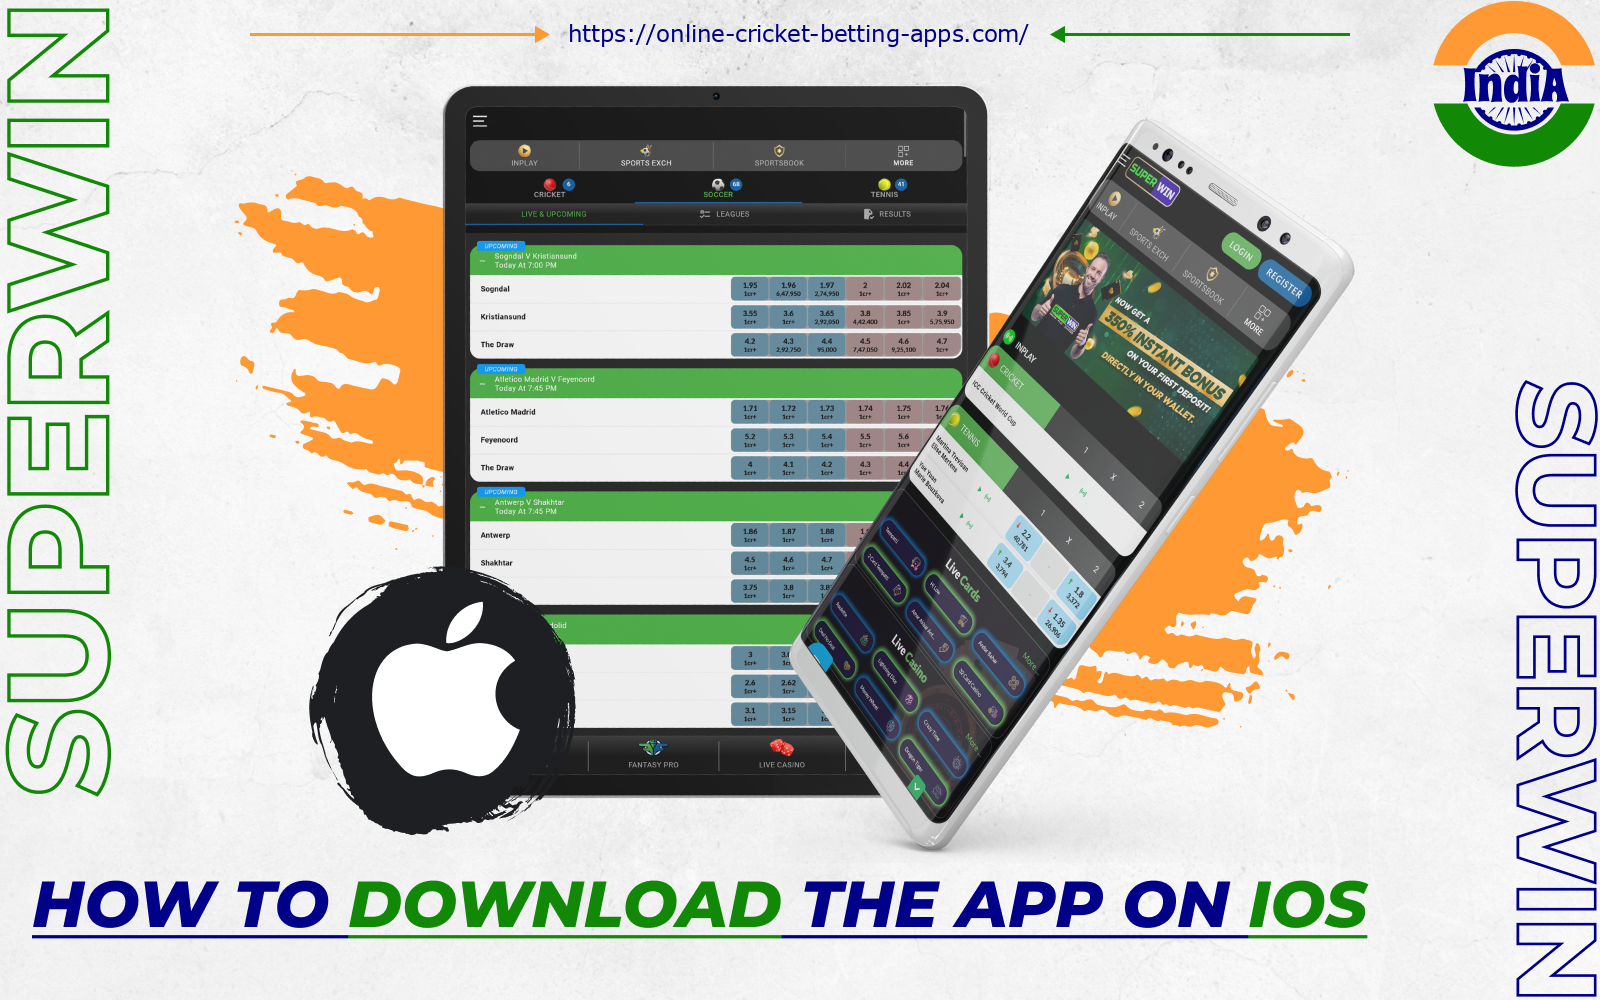 After installing the SuperWin mobile app for iOS, Indian players will have access to sports betting options, casino games, payment methods and promotions